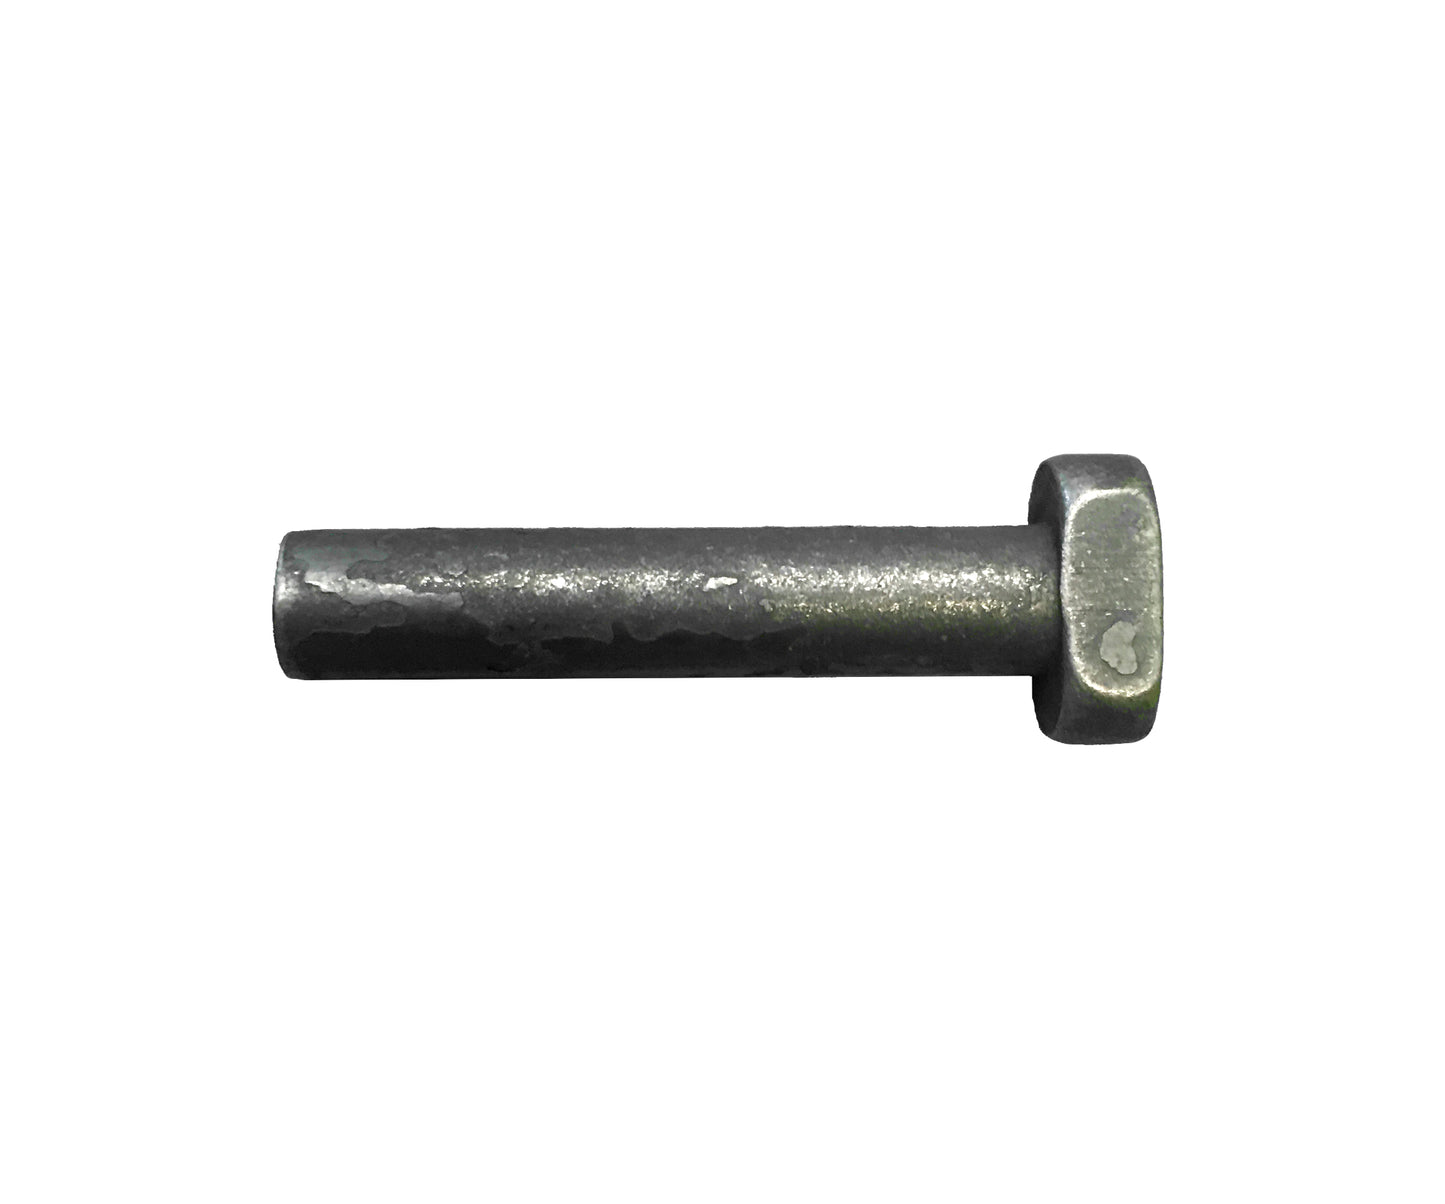 Trencher Repair Link w Pins, fits Many Chain trenchers with 3.067" Pitch